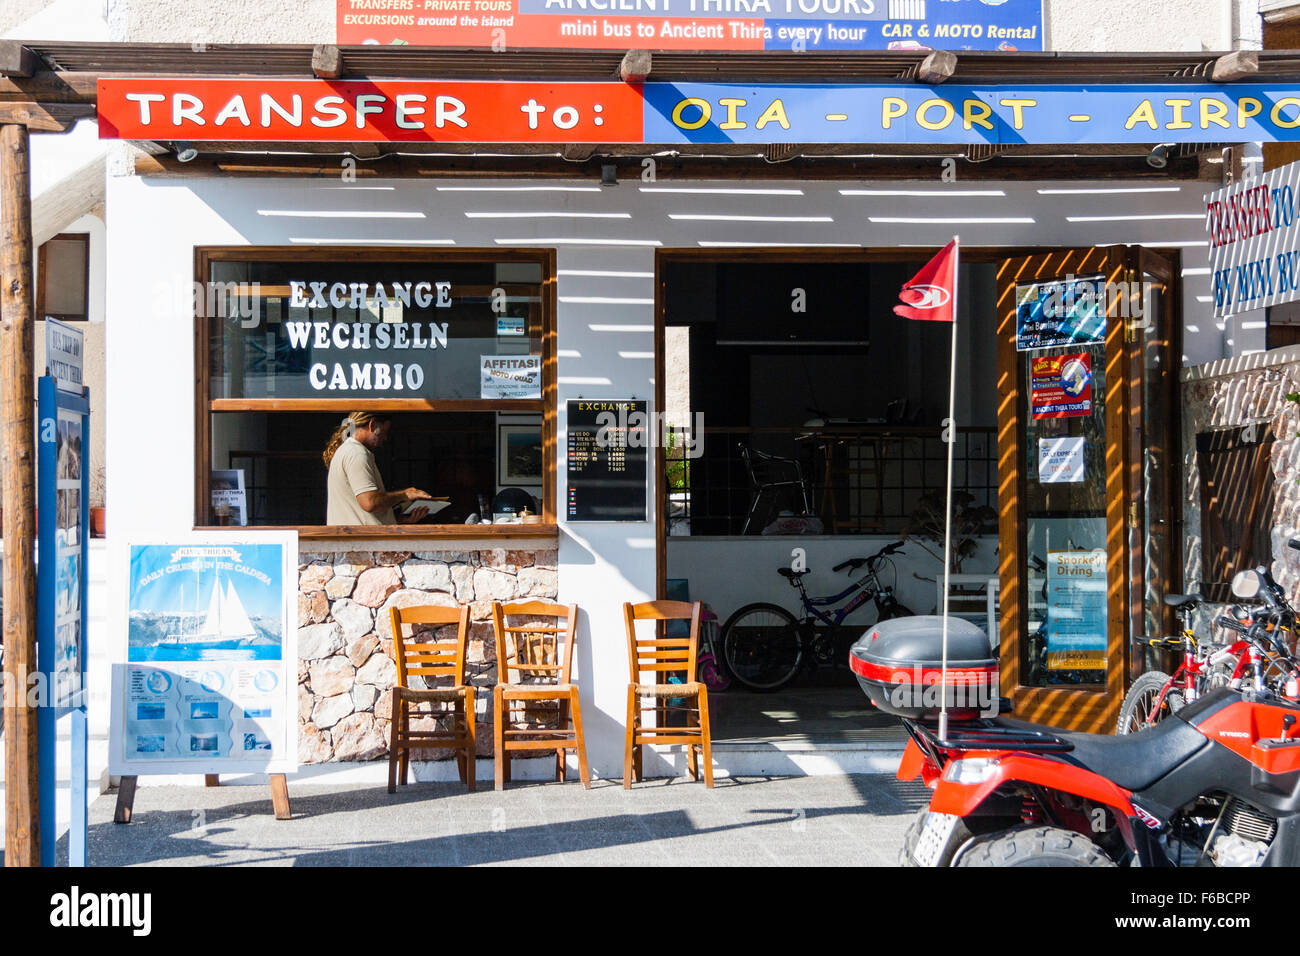 Santorini, Thira. Kamari. Tourist information centre building with currency exchange window, quad-hire bikes, and transfer service to airport. Stock Photo